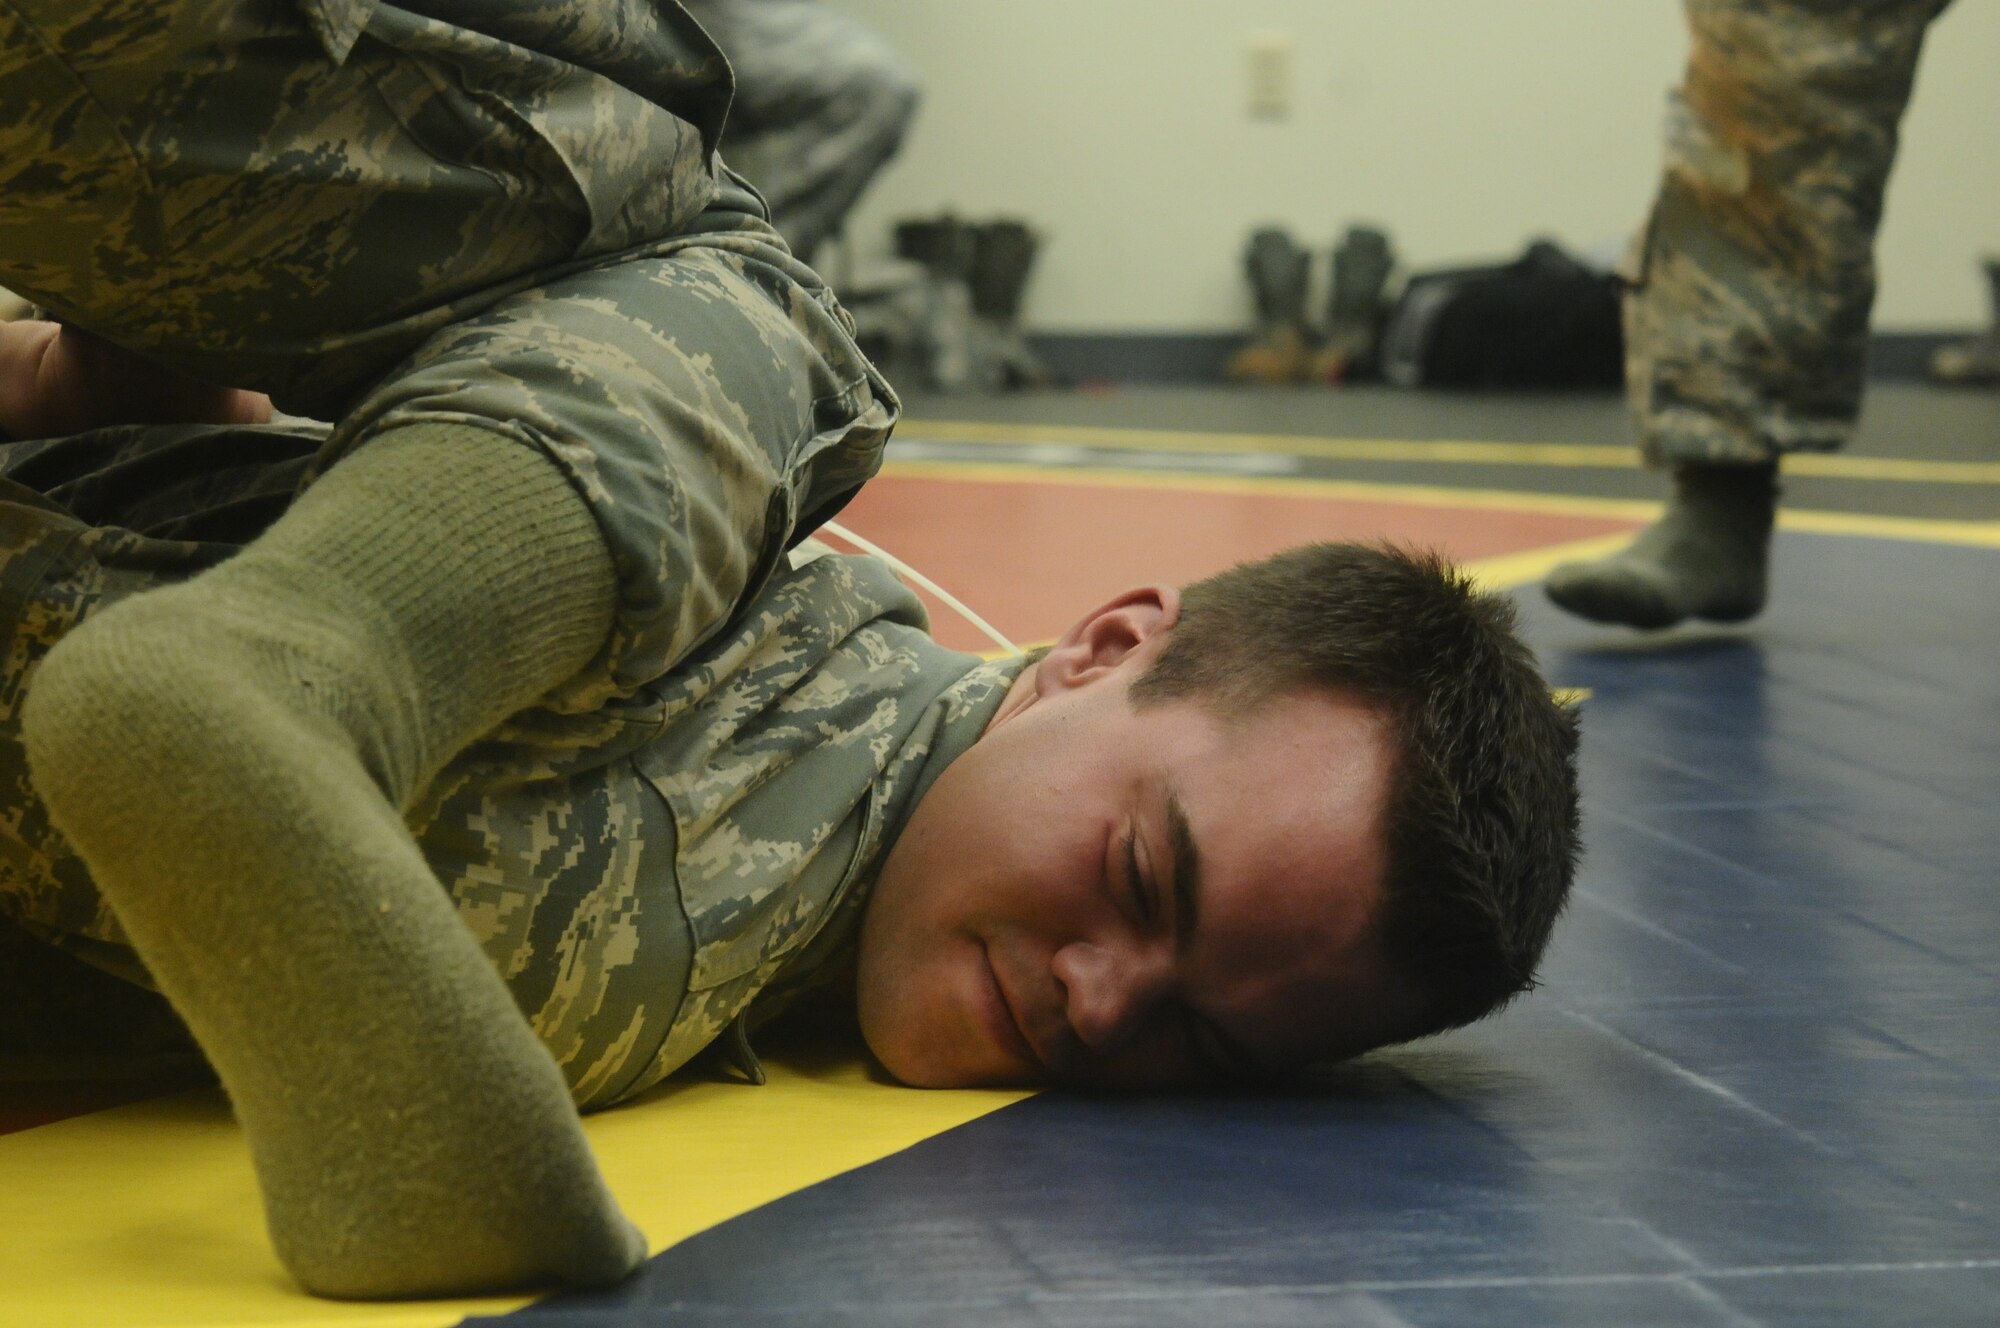 Airman 1st Class Kyle Wilson, 36th Contingency Response Group knowledge operations apprentice, is handcuffed as part of a combatives training scenario at the Pacific Regional Training Center on Northwest Field, Guam, June 26, 2013. The training was part of a new sustainment training program that will become part of a monthly regimen designed to keep Airmen current on skills such as rules of engagement, use of force, integrated defense and rifle-fighting techniques. (U.S. Air Force photo by Airman 1st Class Mariah Haddenham/Released)